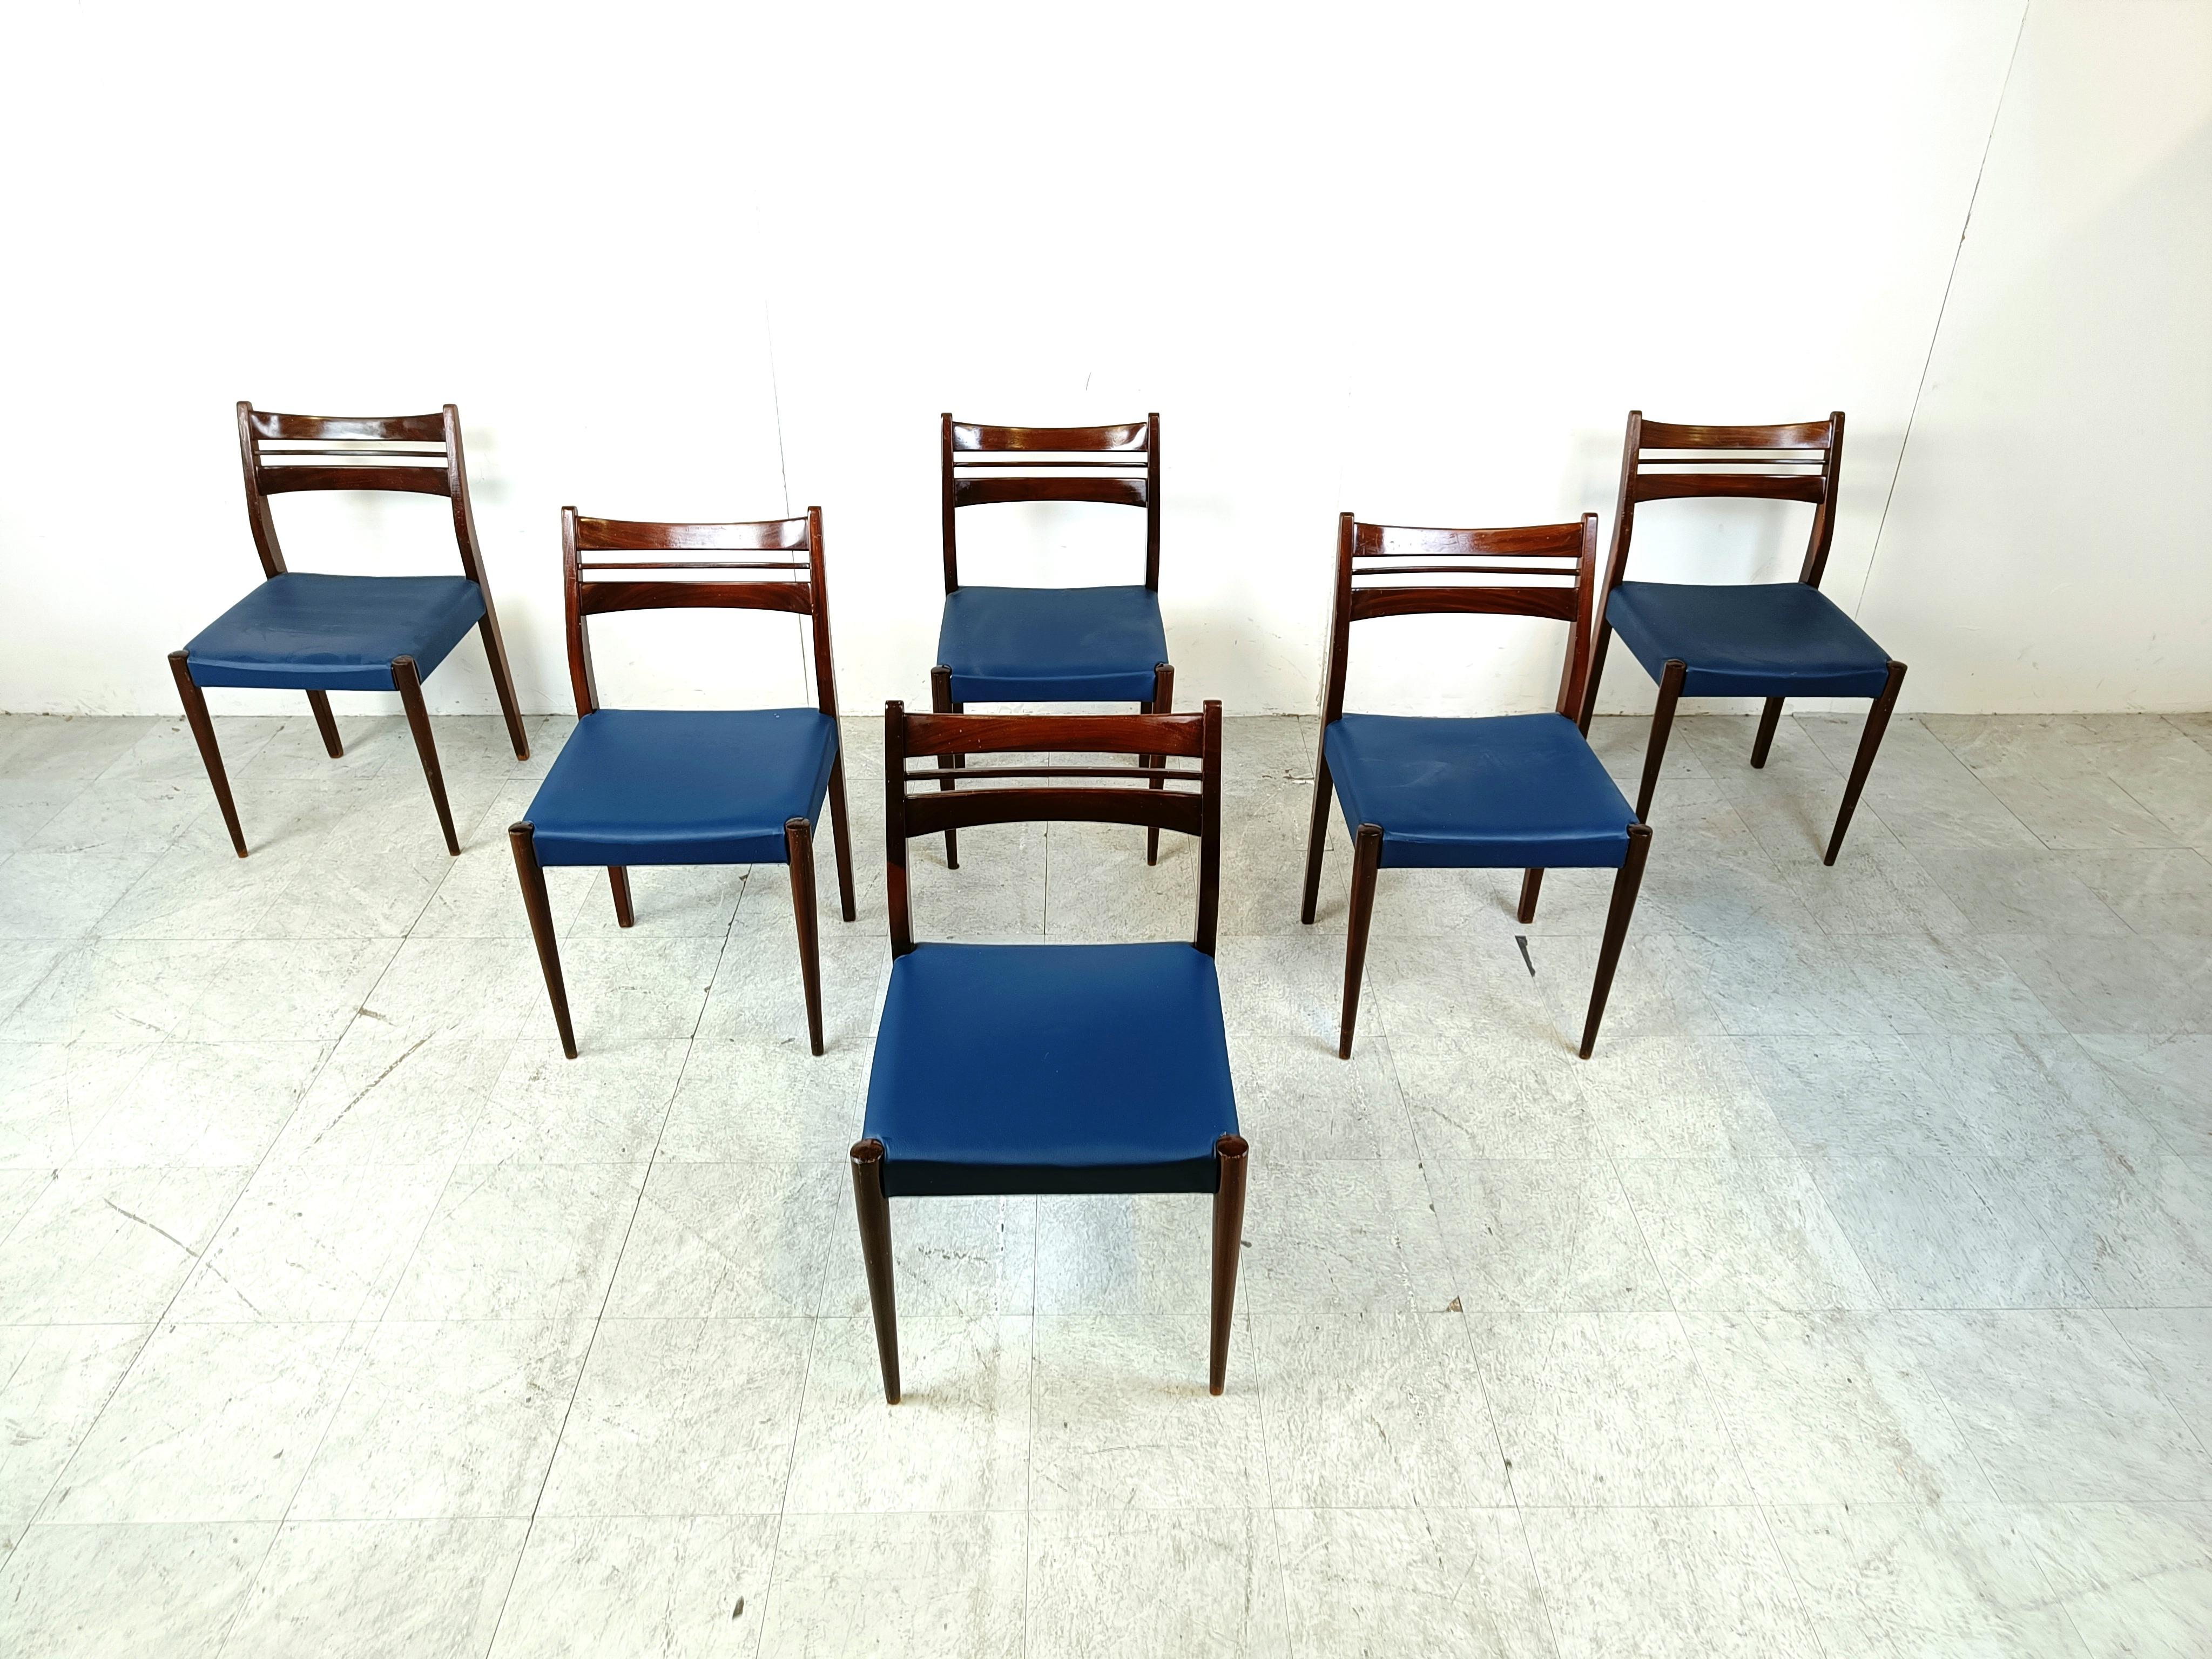 Mid century wooden dining chairs with blmue leatherette seats.

Lovely scandinavian design, with eye for quality. Notice the nice wooden veining.

Good condition

1960s - Denmark

Height: 82cm
Width: 47cm
Depth: 45cm
Seat height: 45cm

Ref.: